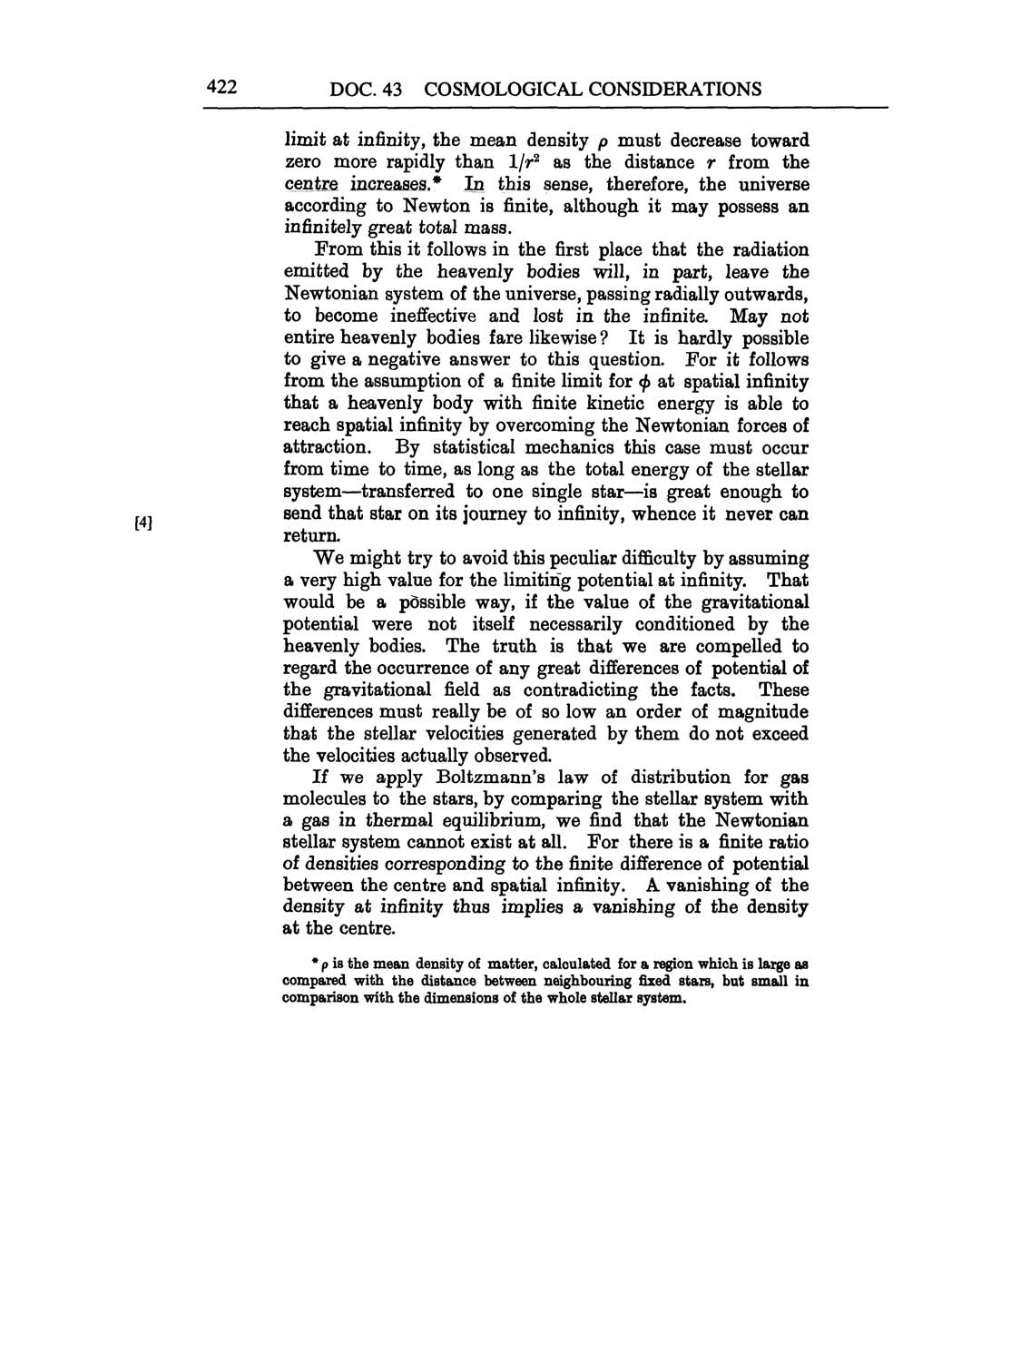 Volume 6: The Berlin Years: Writings, 1914-1917 (English translation supplement) page 422